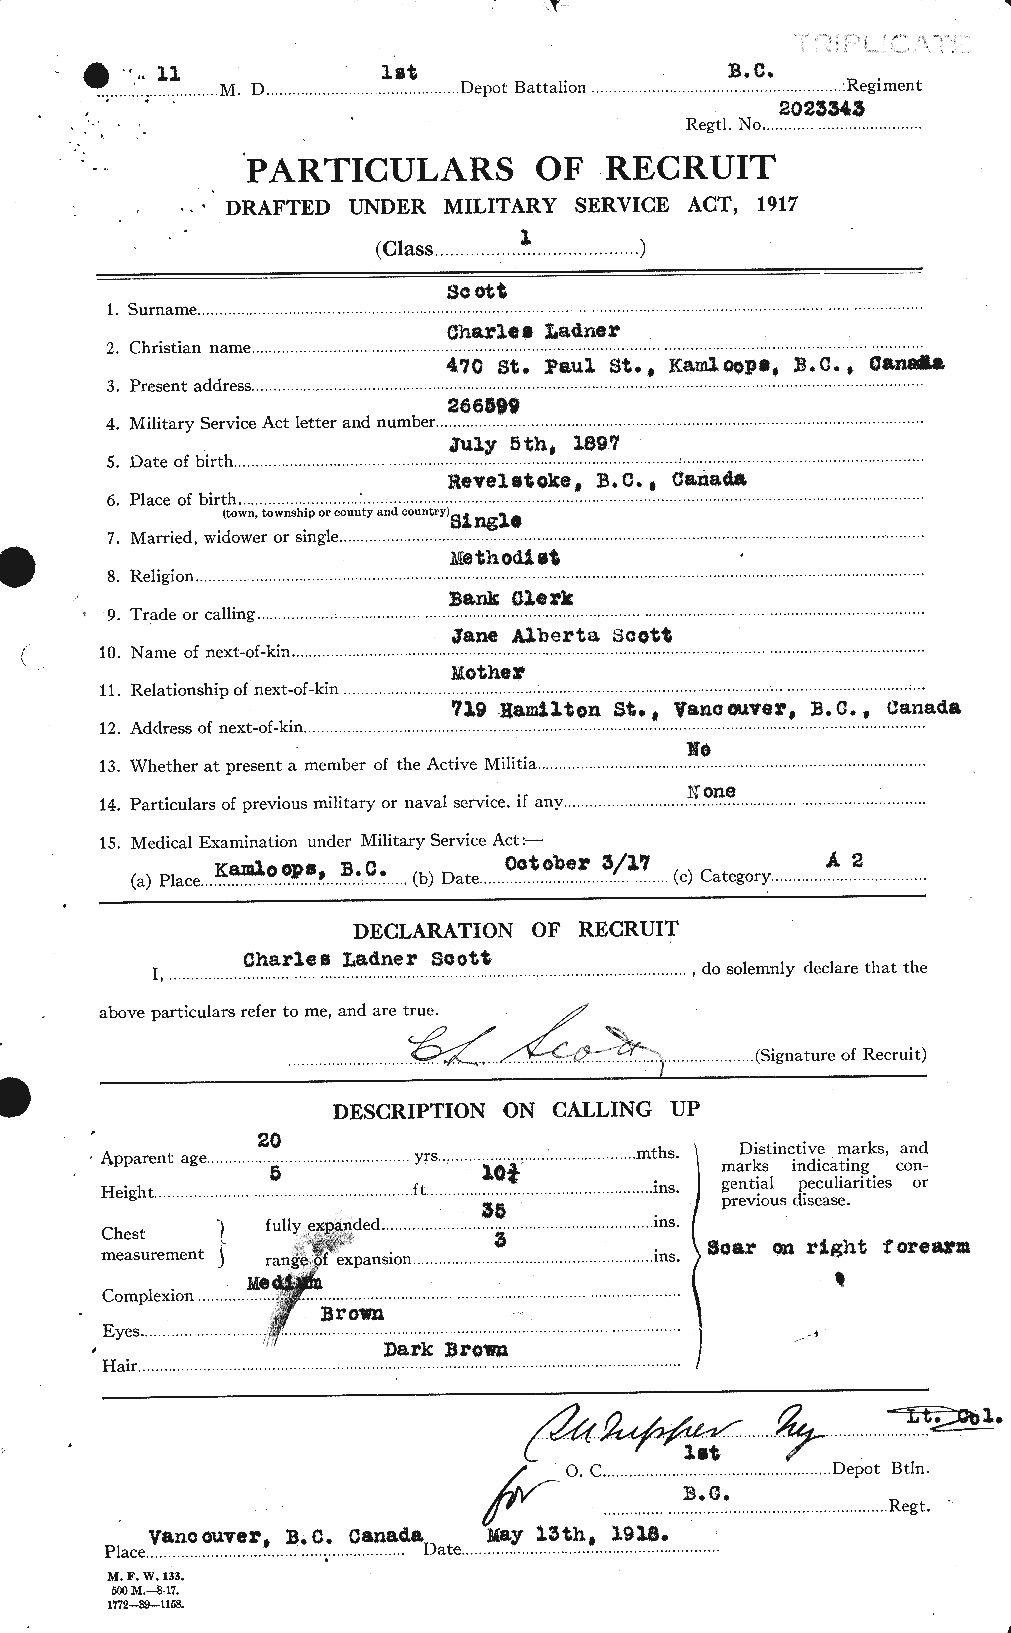 Personnel Records of the First World War - CEF 085886a